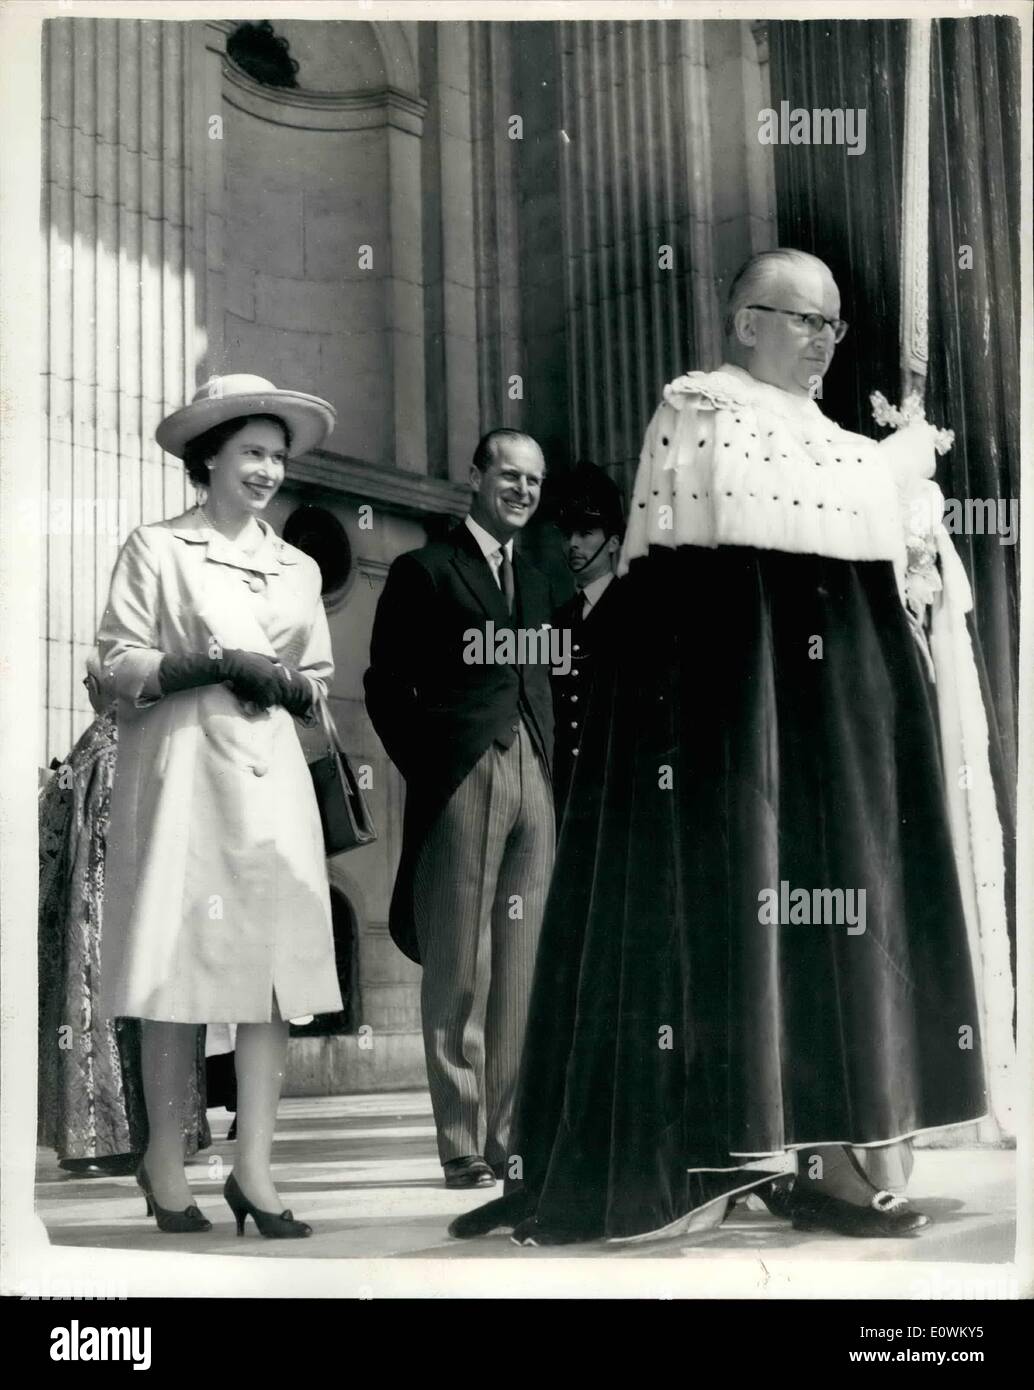 May 05, 1963 - Queen and the Duke at Thanksgiving for Marriage Service: The Queen and the Duke of Edinburgh today attended a ''Thanksgiving for Marriage'' service at St. Paul's Cathedral which marked the end of Christian Family Year. Photo shows The Queen and the Duke of Edinburgh smile at the Lord Mayor Sir Ralph Perring after the service today. Stock Photo